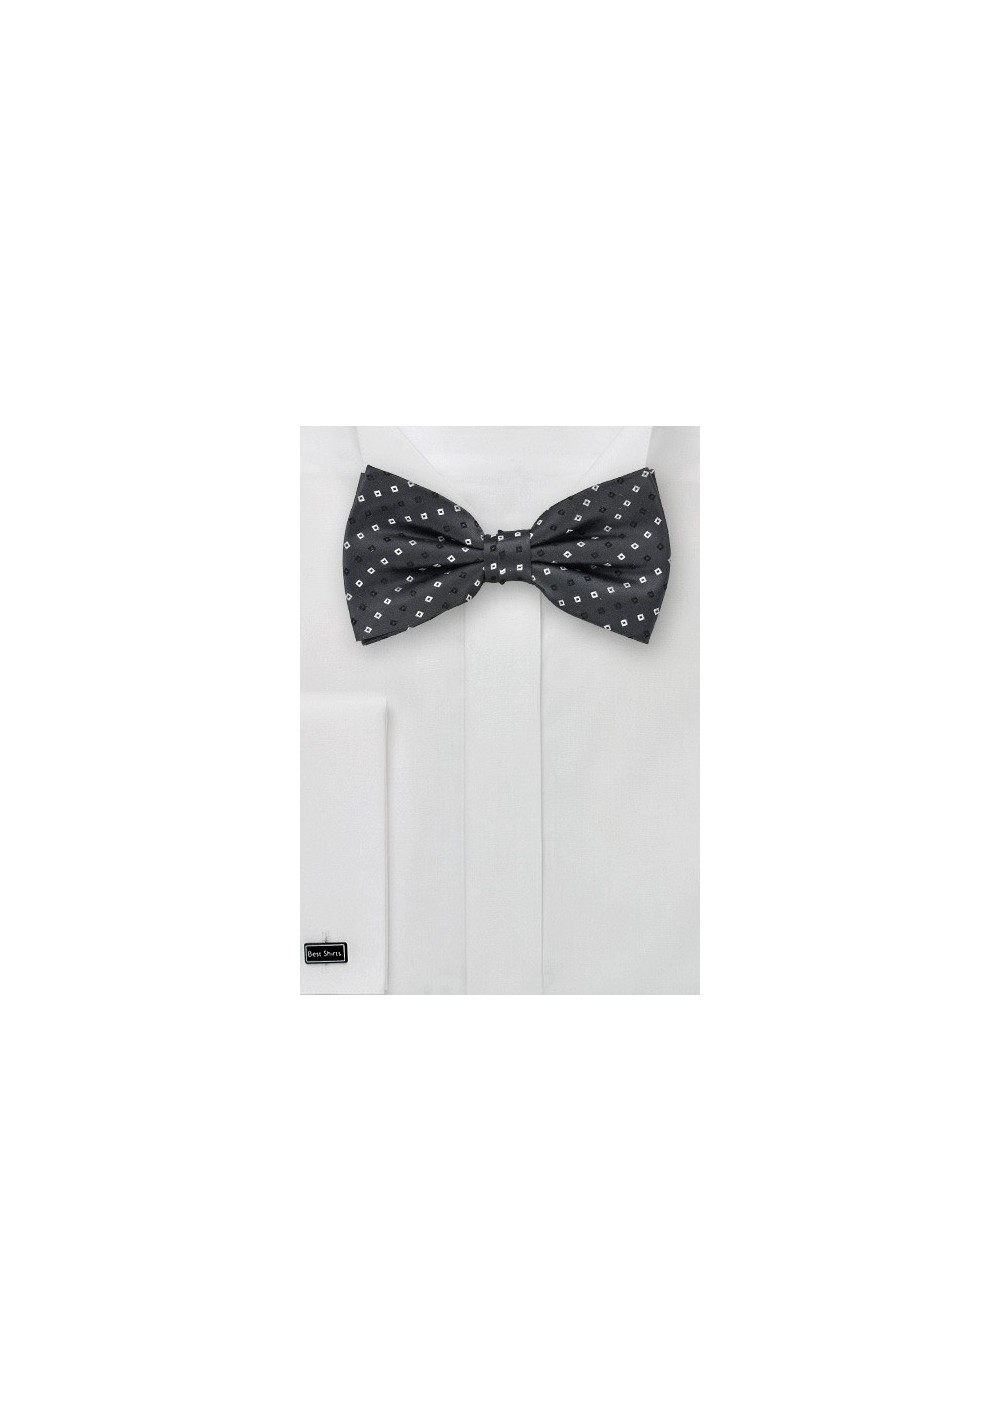 Silk Bow Ties - CLassy Bow Tie with Matching Pocket Square